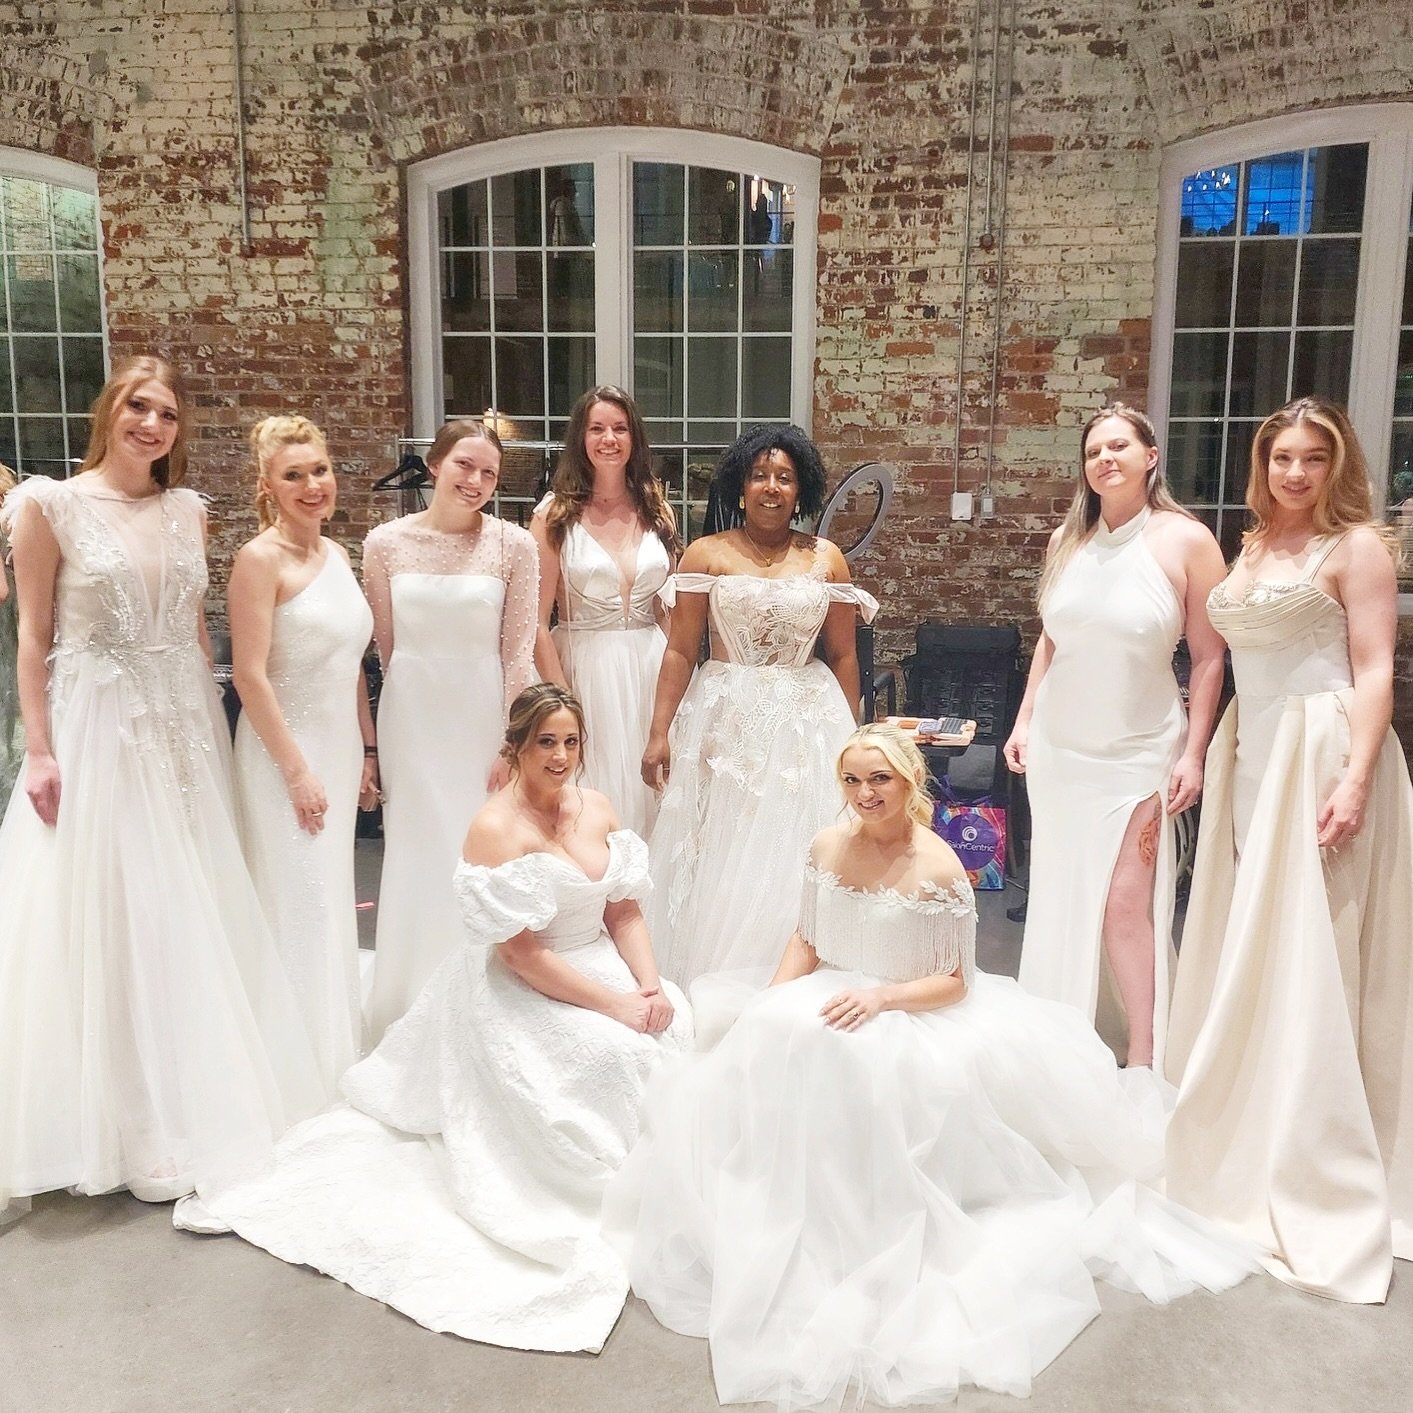 Thank you to all the beautiful women who modeled our gowns at the Rouge Ball last night!

#therougeball #womensupportingwomen #womenswmpowerment #fashionshow #bridal #weddingdresses #charity